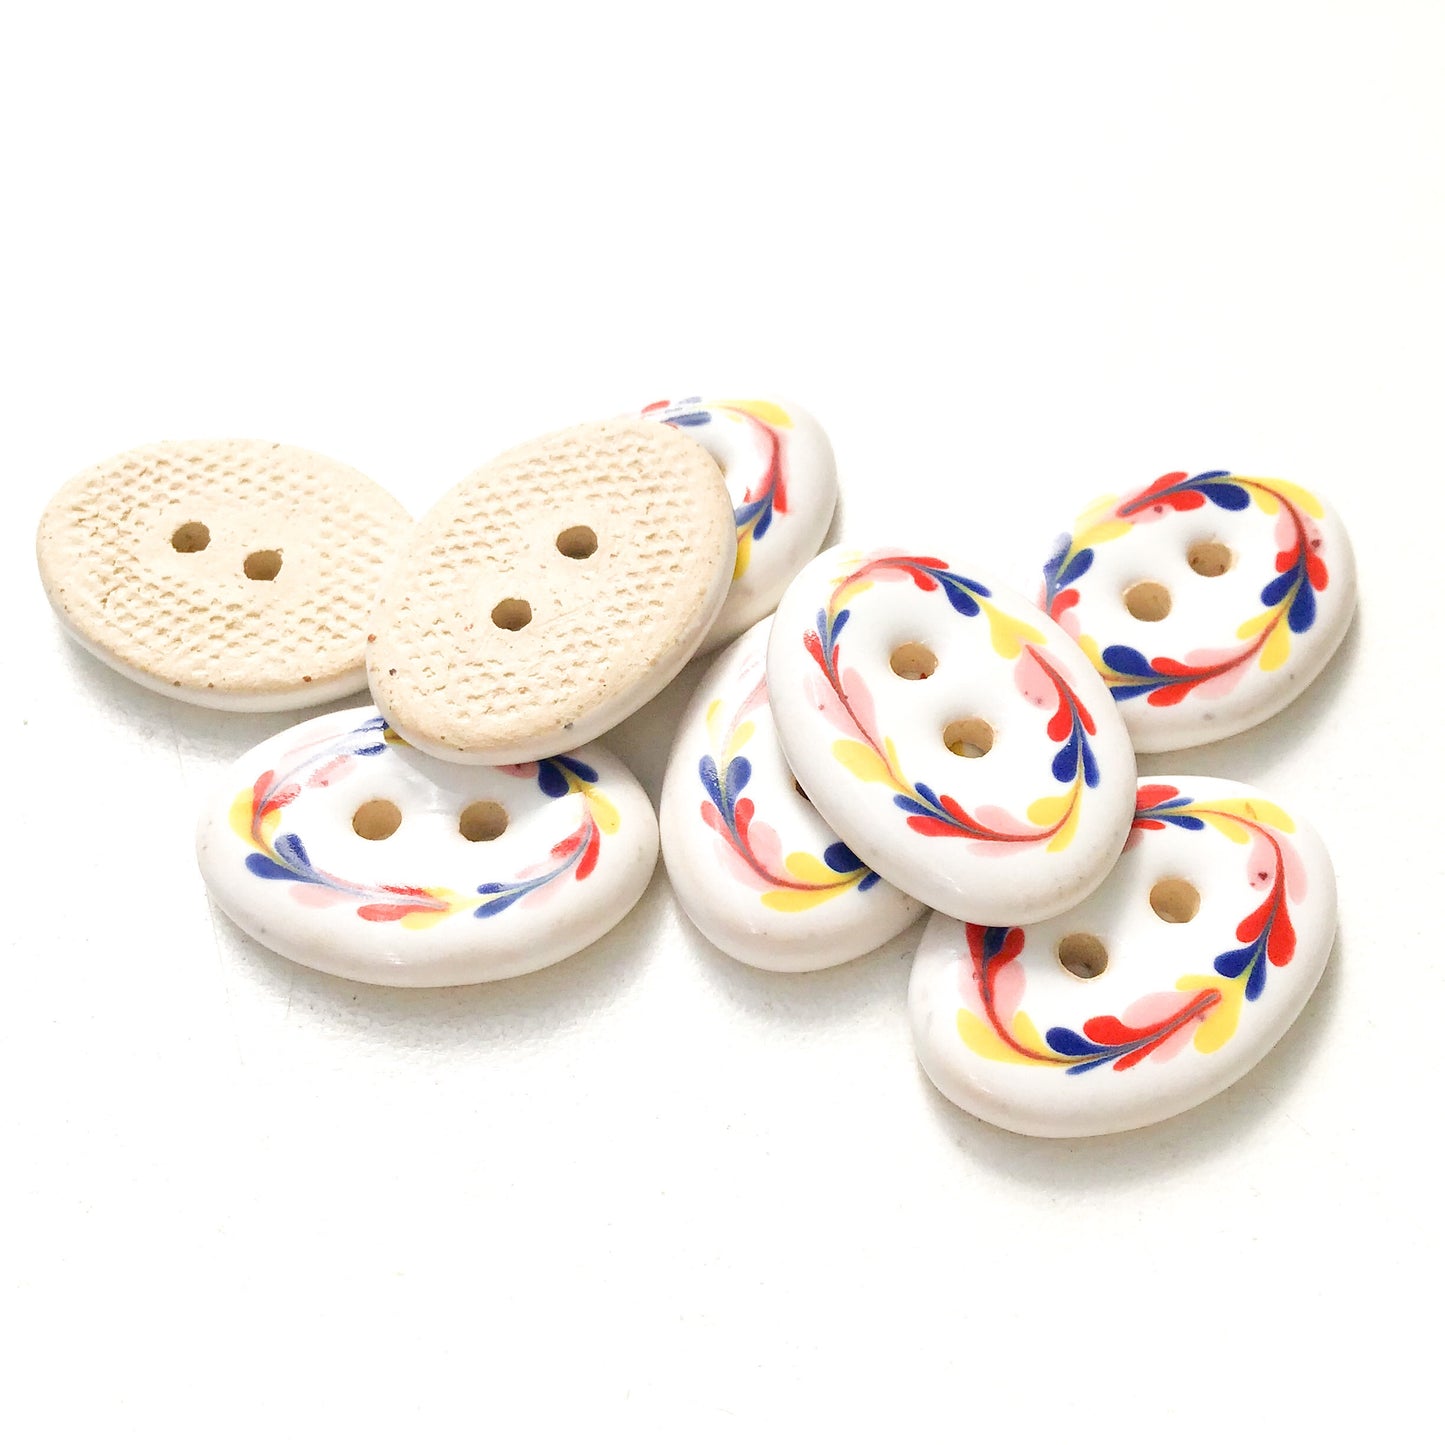 White Ceramic Buttons with Colorful Floral Wreath - Oval Clay Buttons - 5/8" x 7/8" - 8 Pack